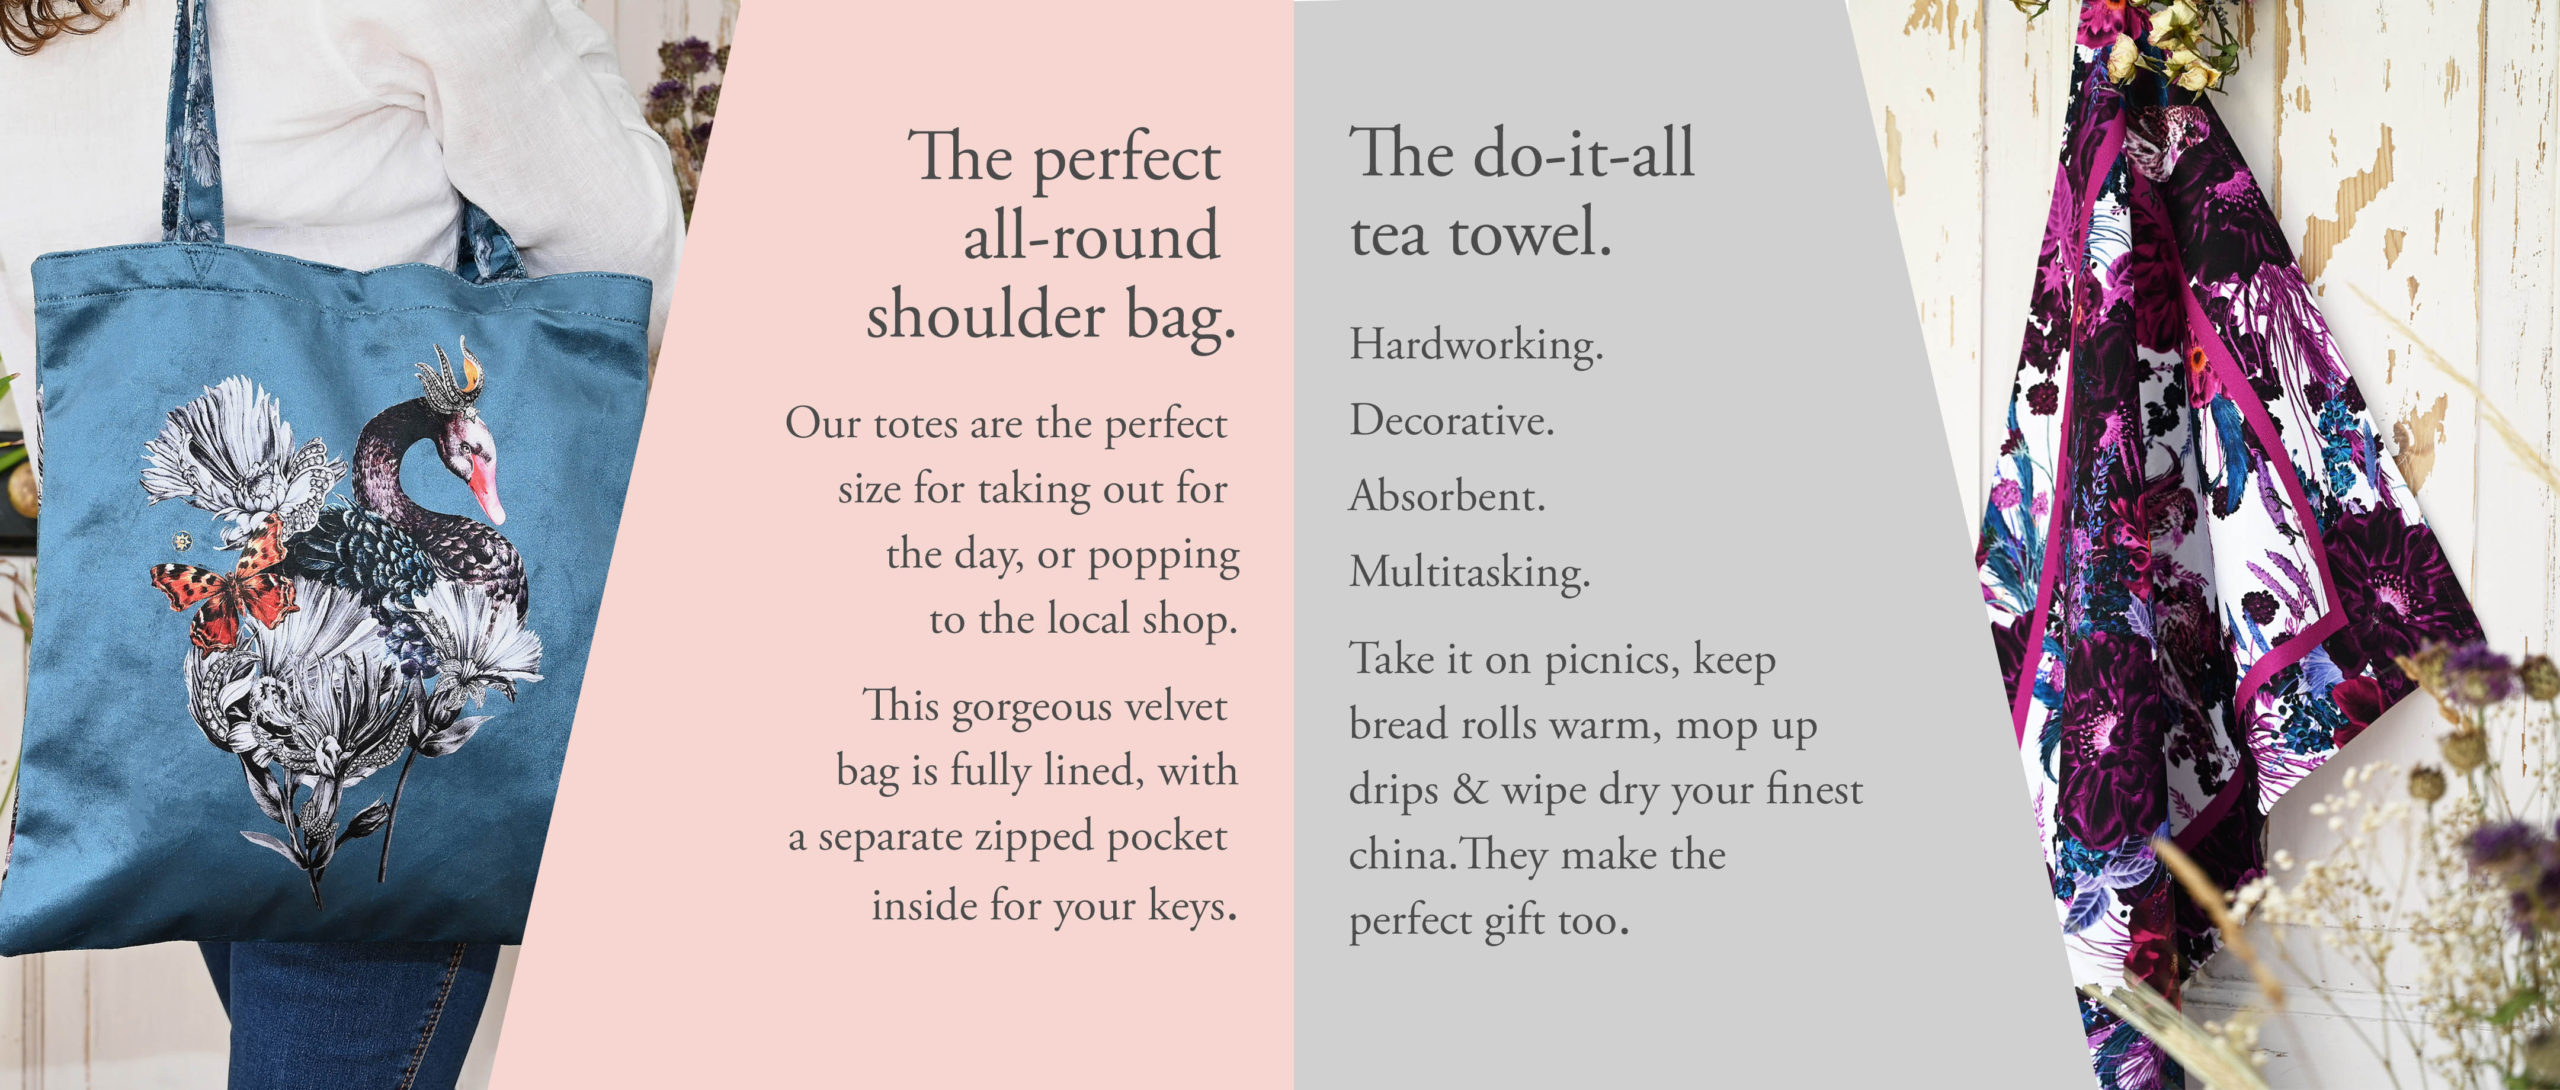 Tote shoulder bags and tea towels made in the UK